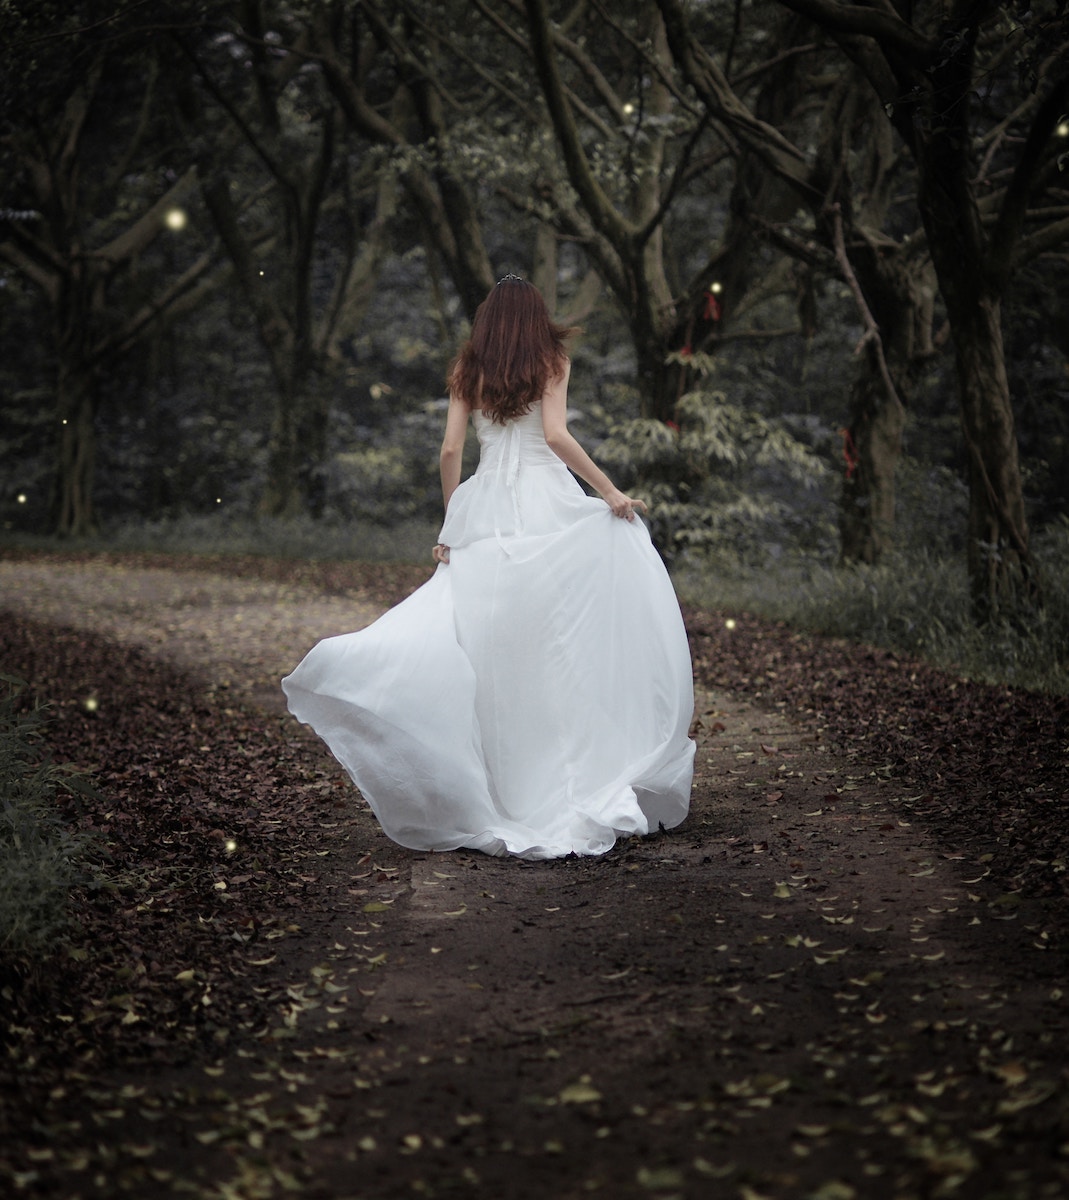 woman in fancy white dress running away on forest path, with sparkles in the air